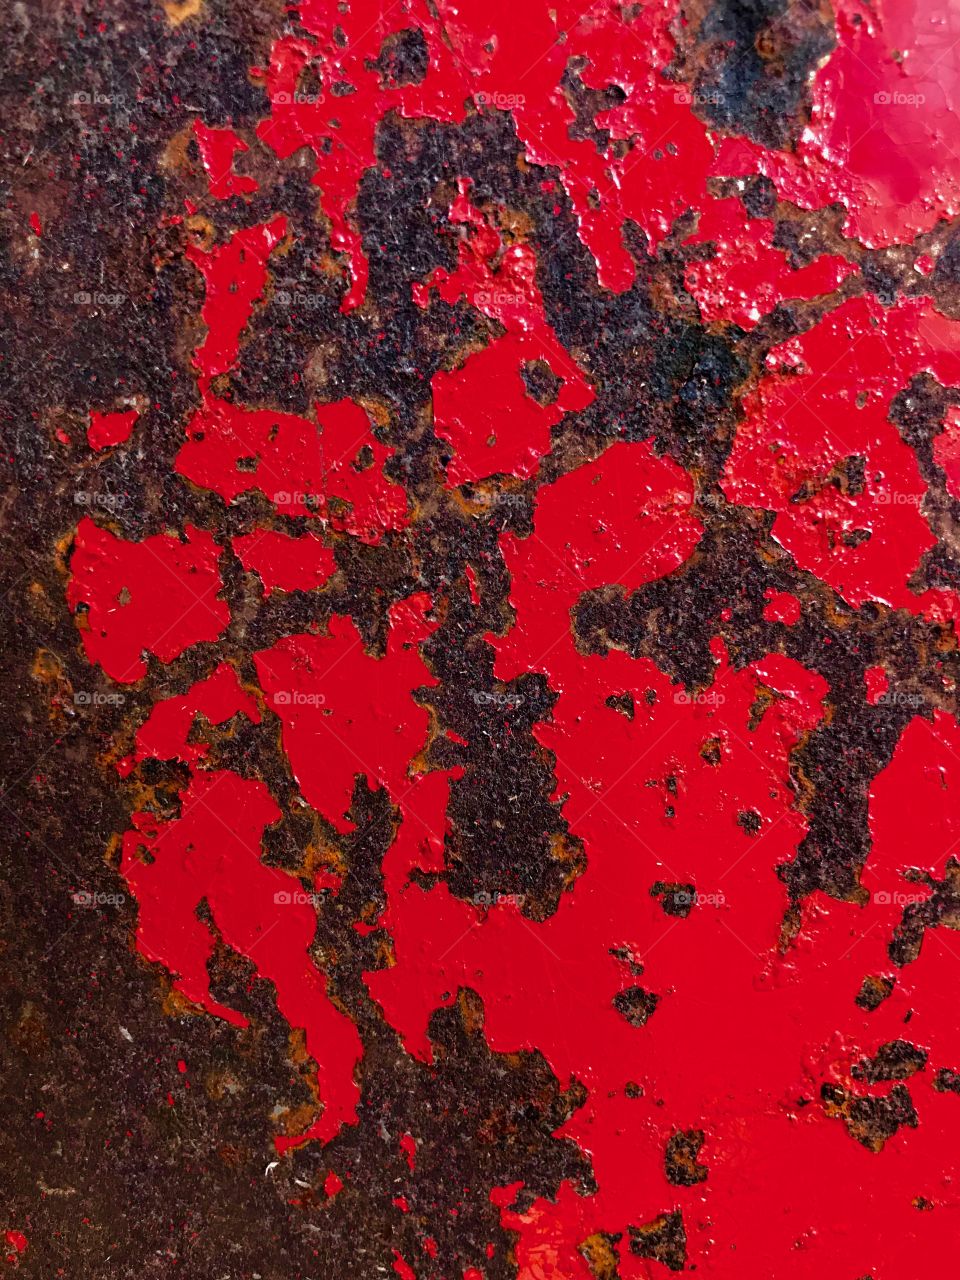 Vibrant Red Paint and Rust